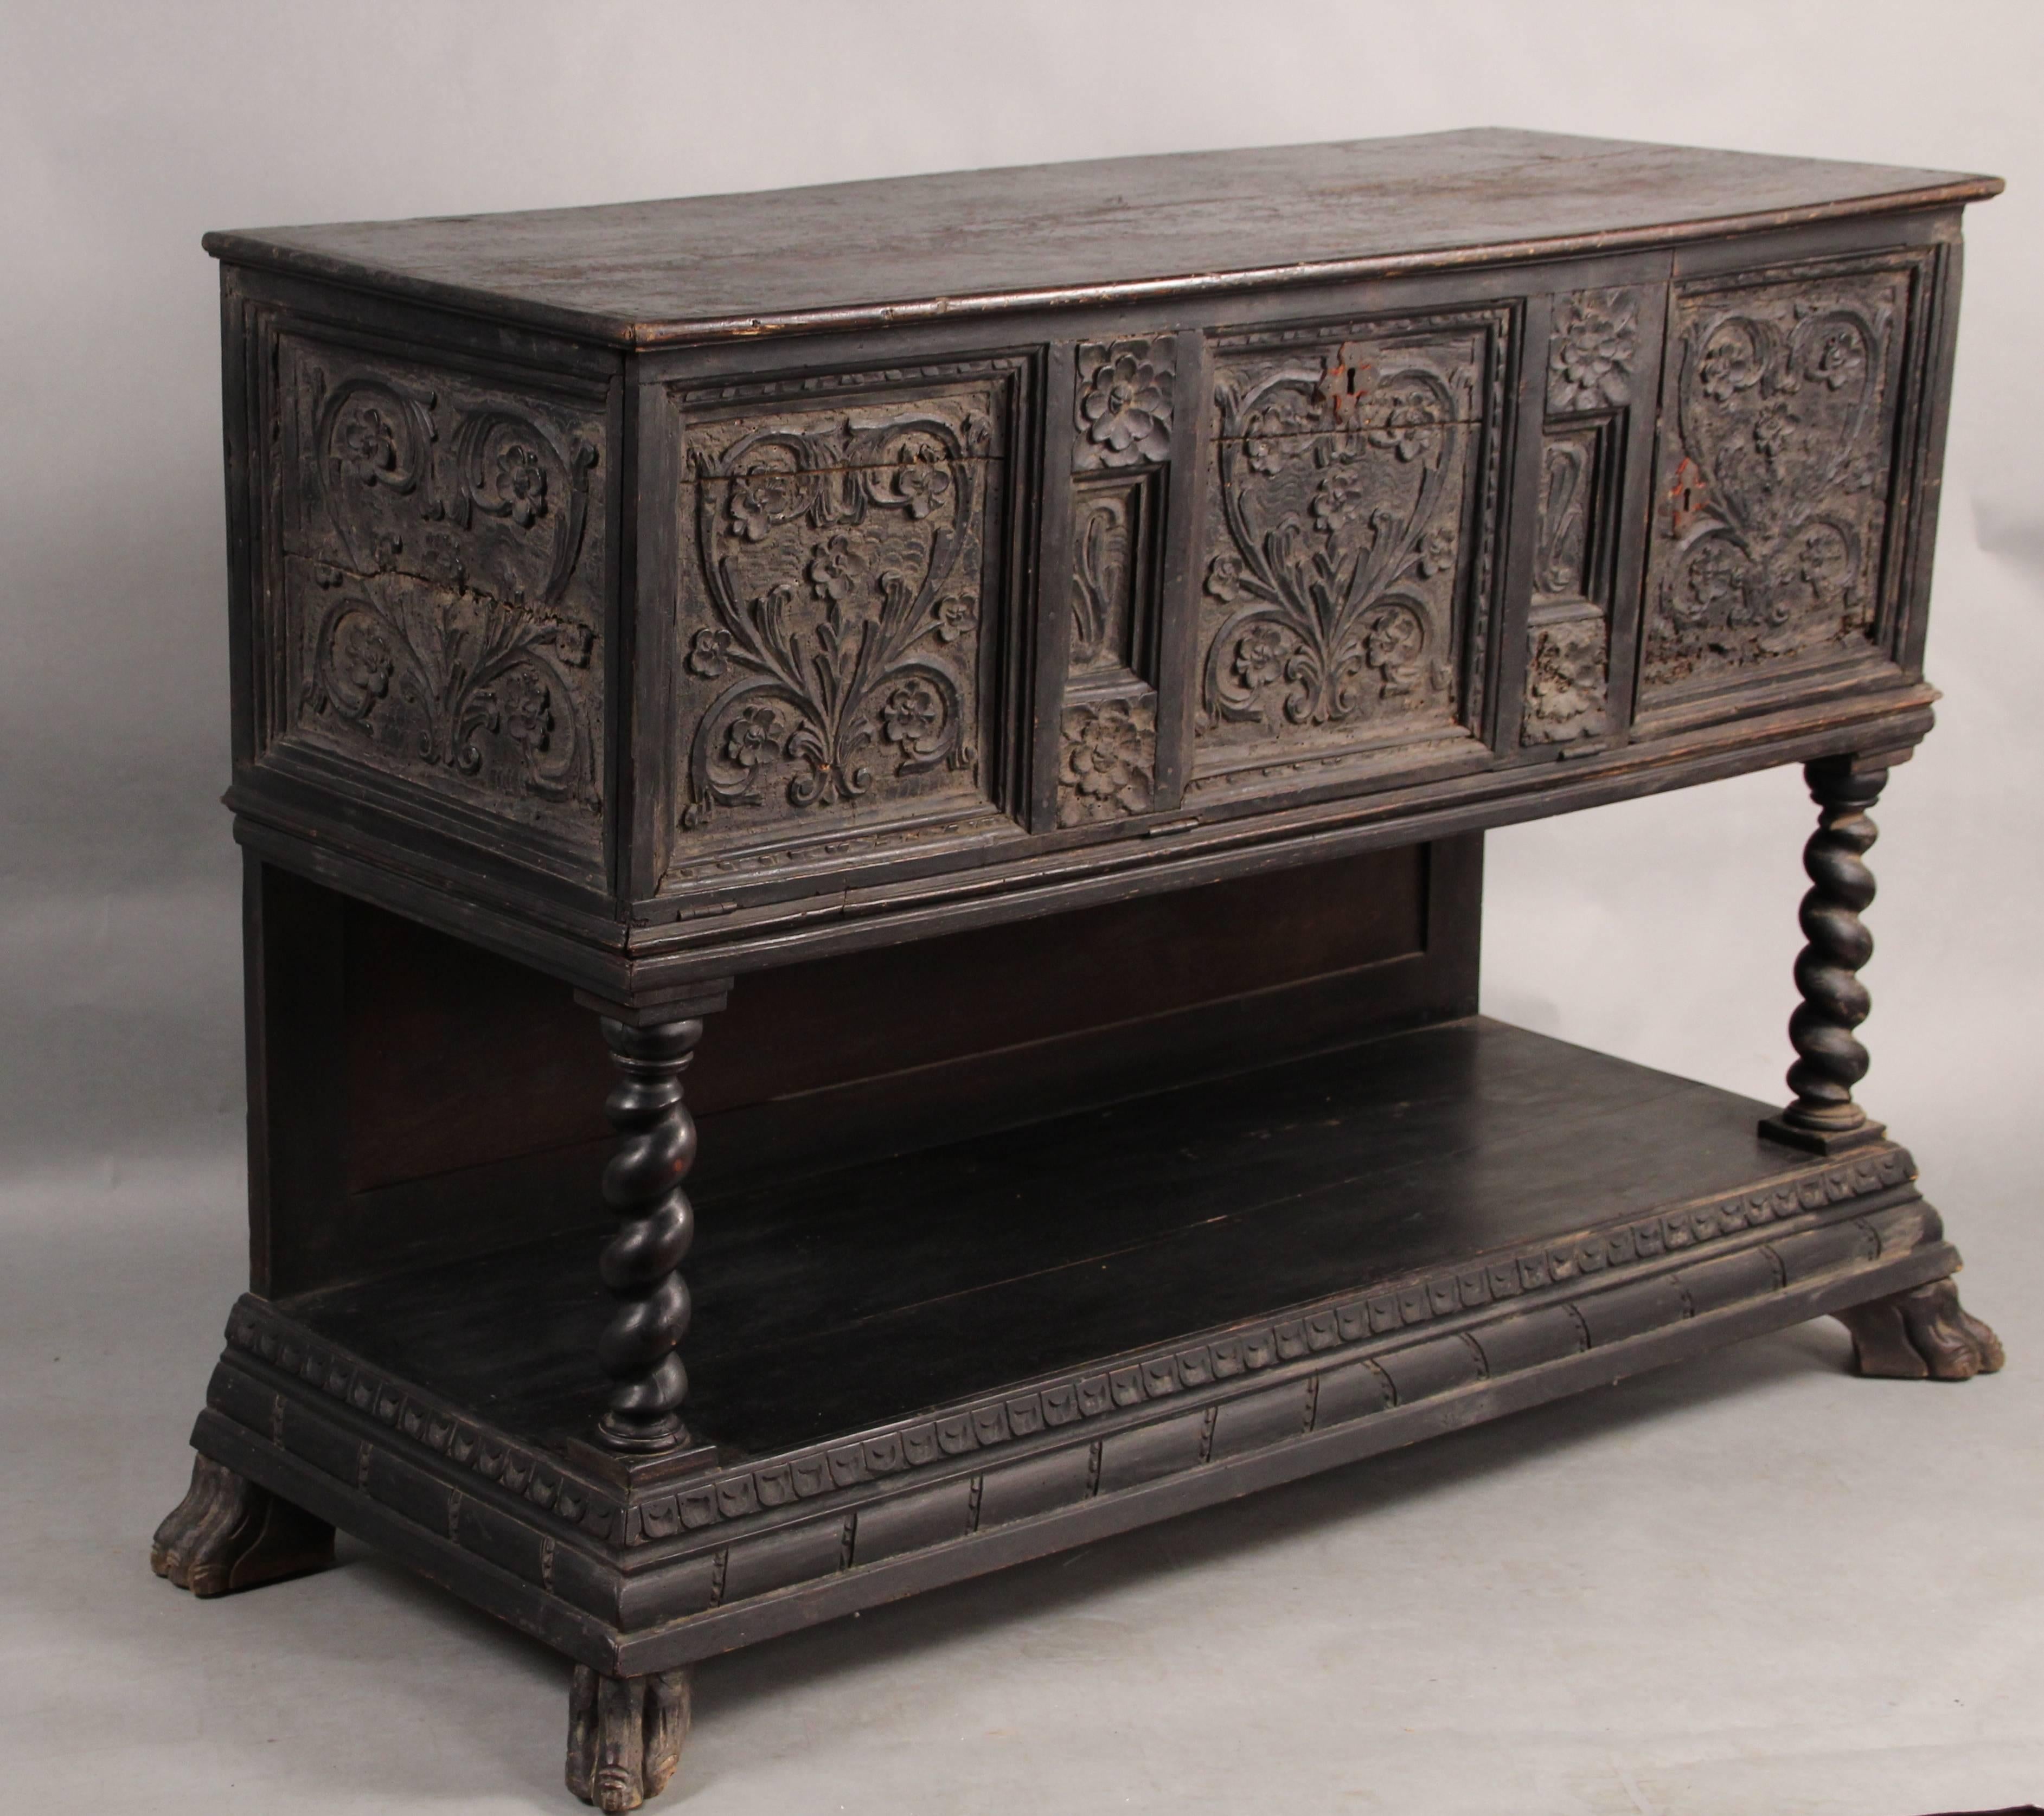 Very early sideboard with hand-carved details. The piece shows wear normal considering the age of the piece.